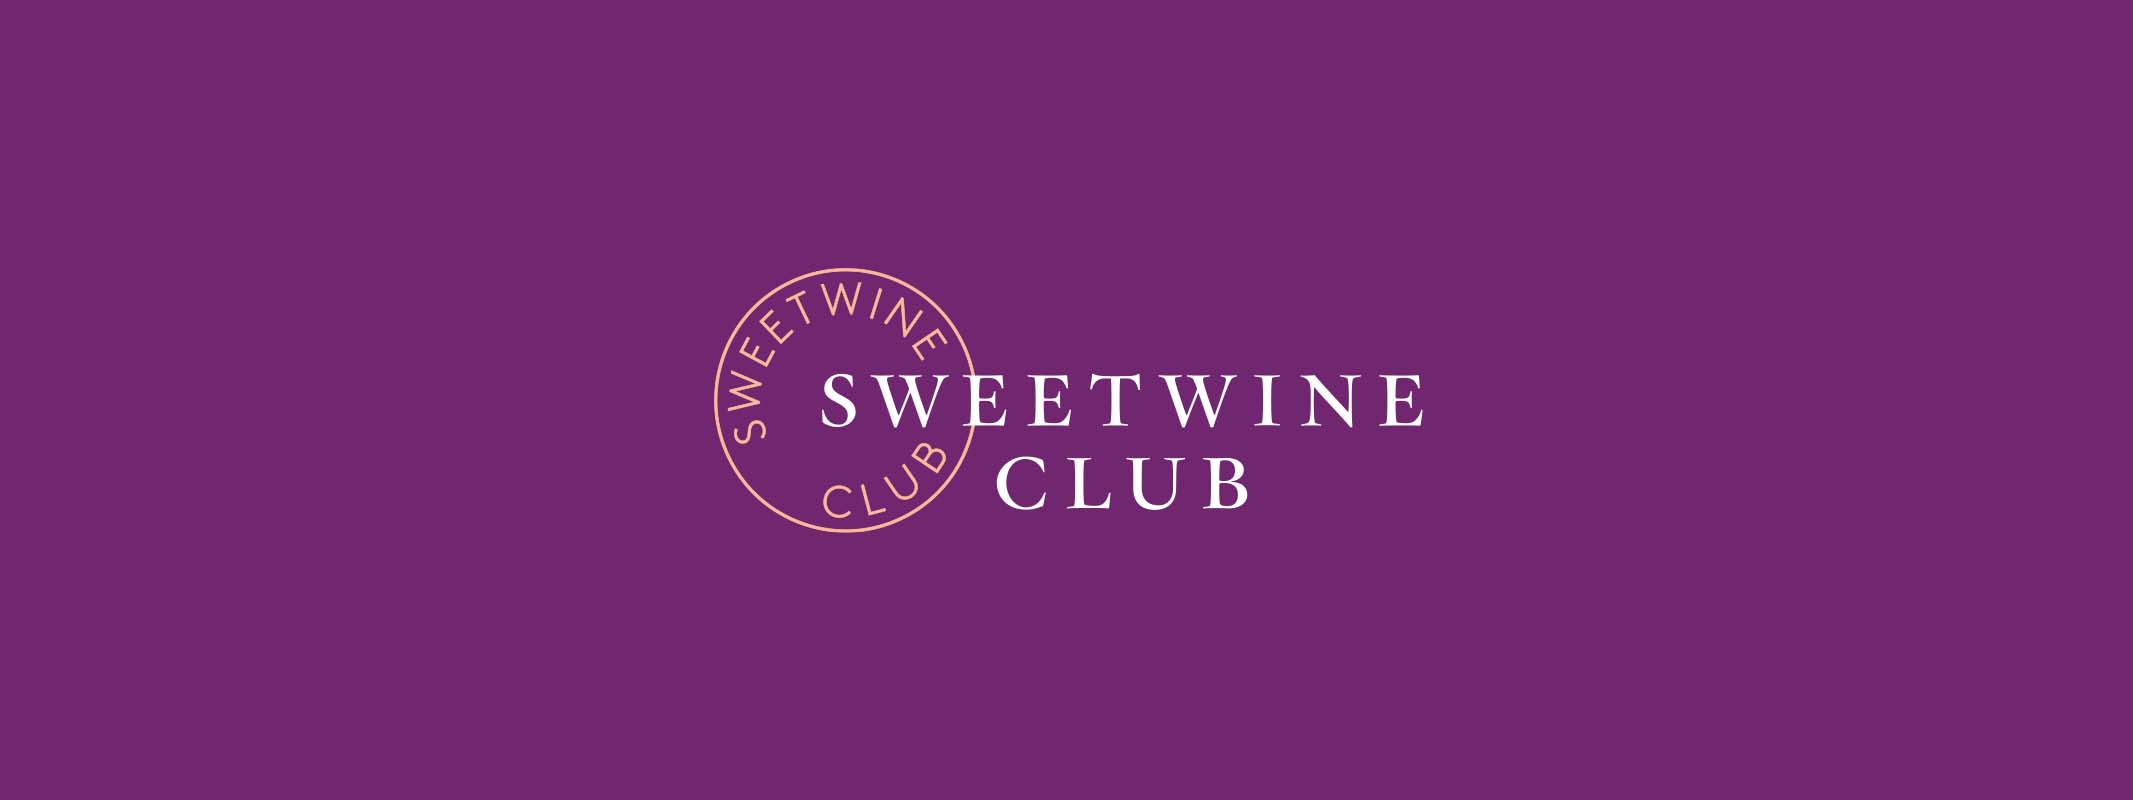 Sweet Wine Club logo superimposed over a purple background